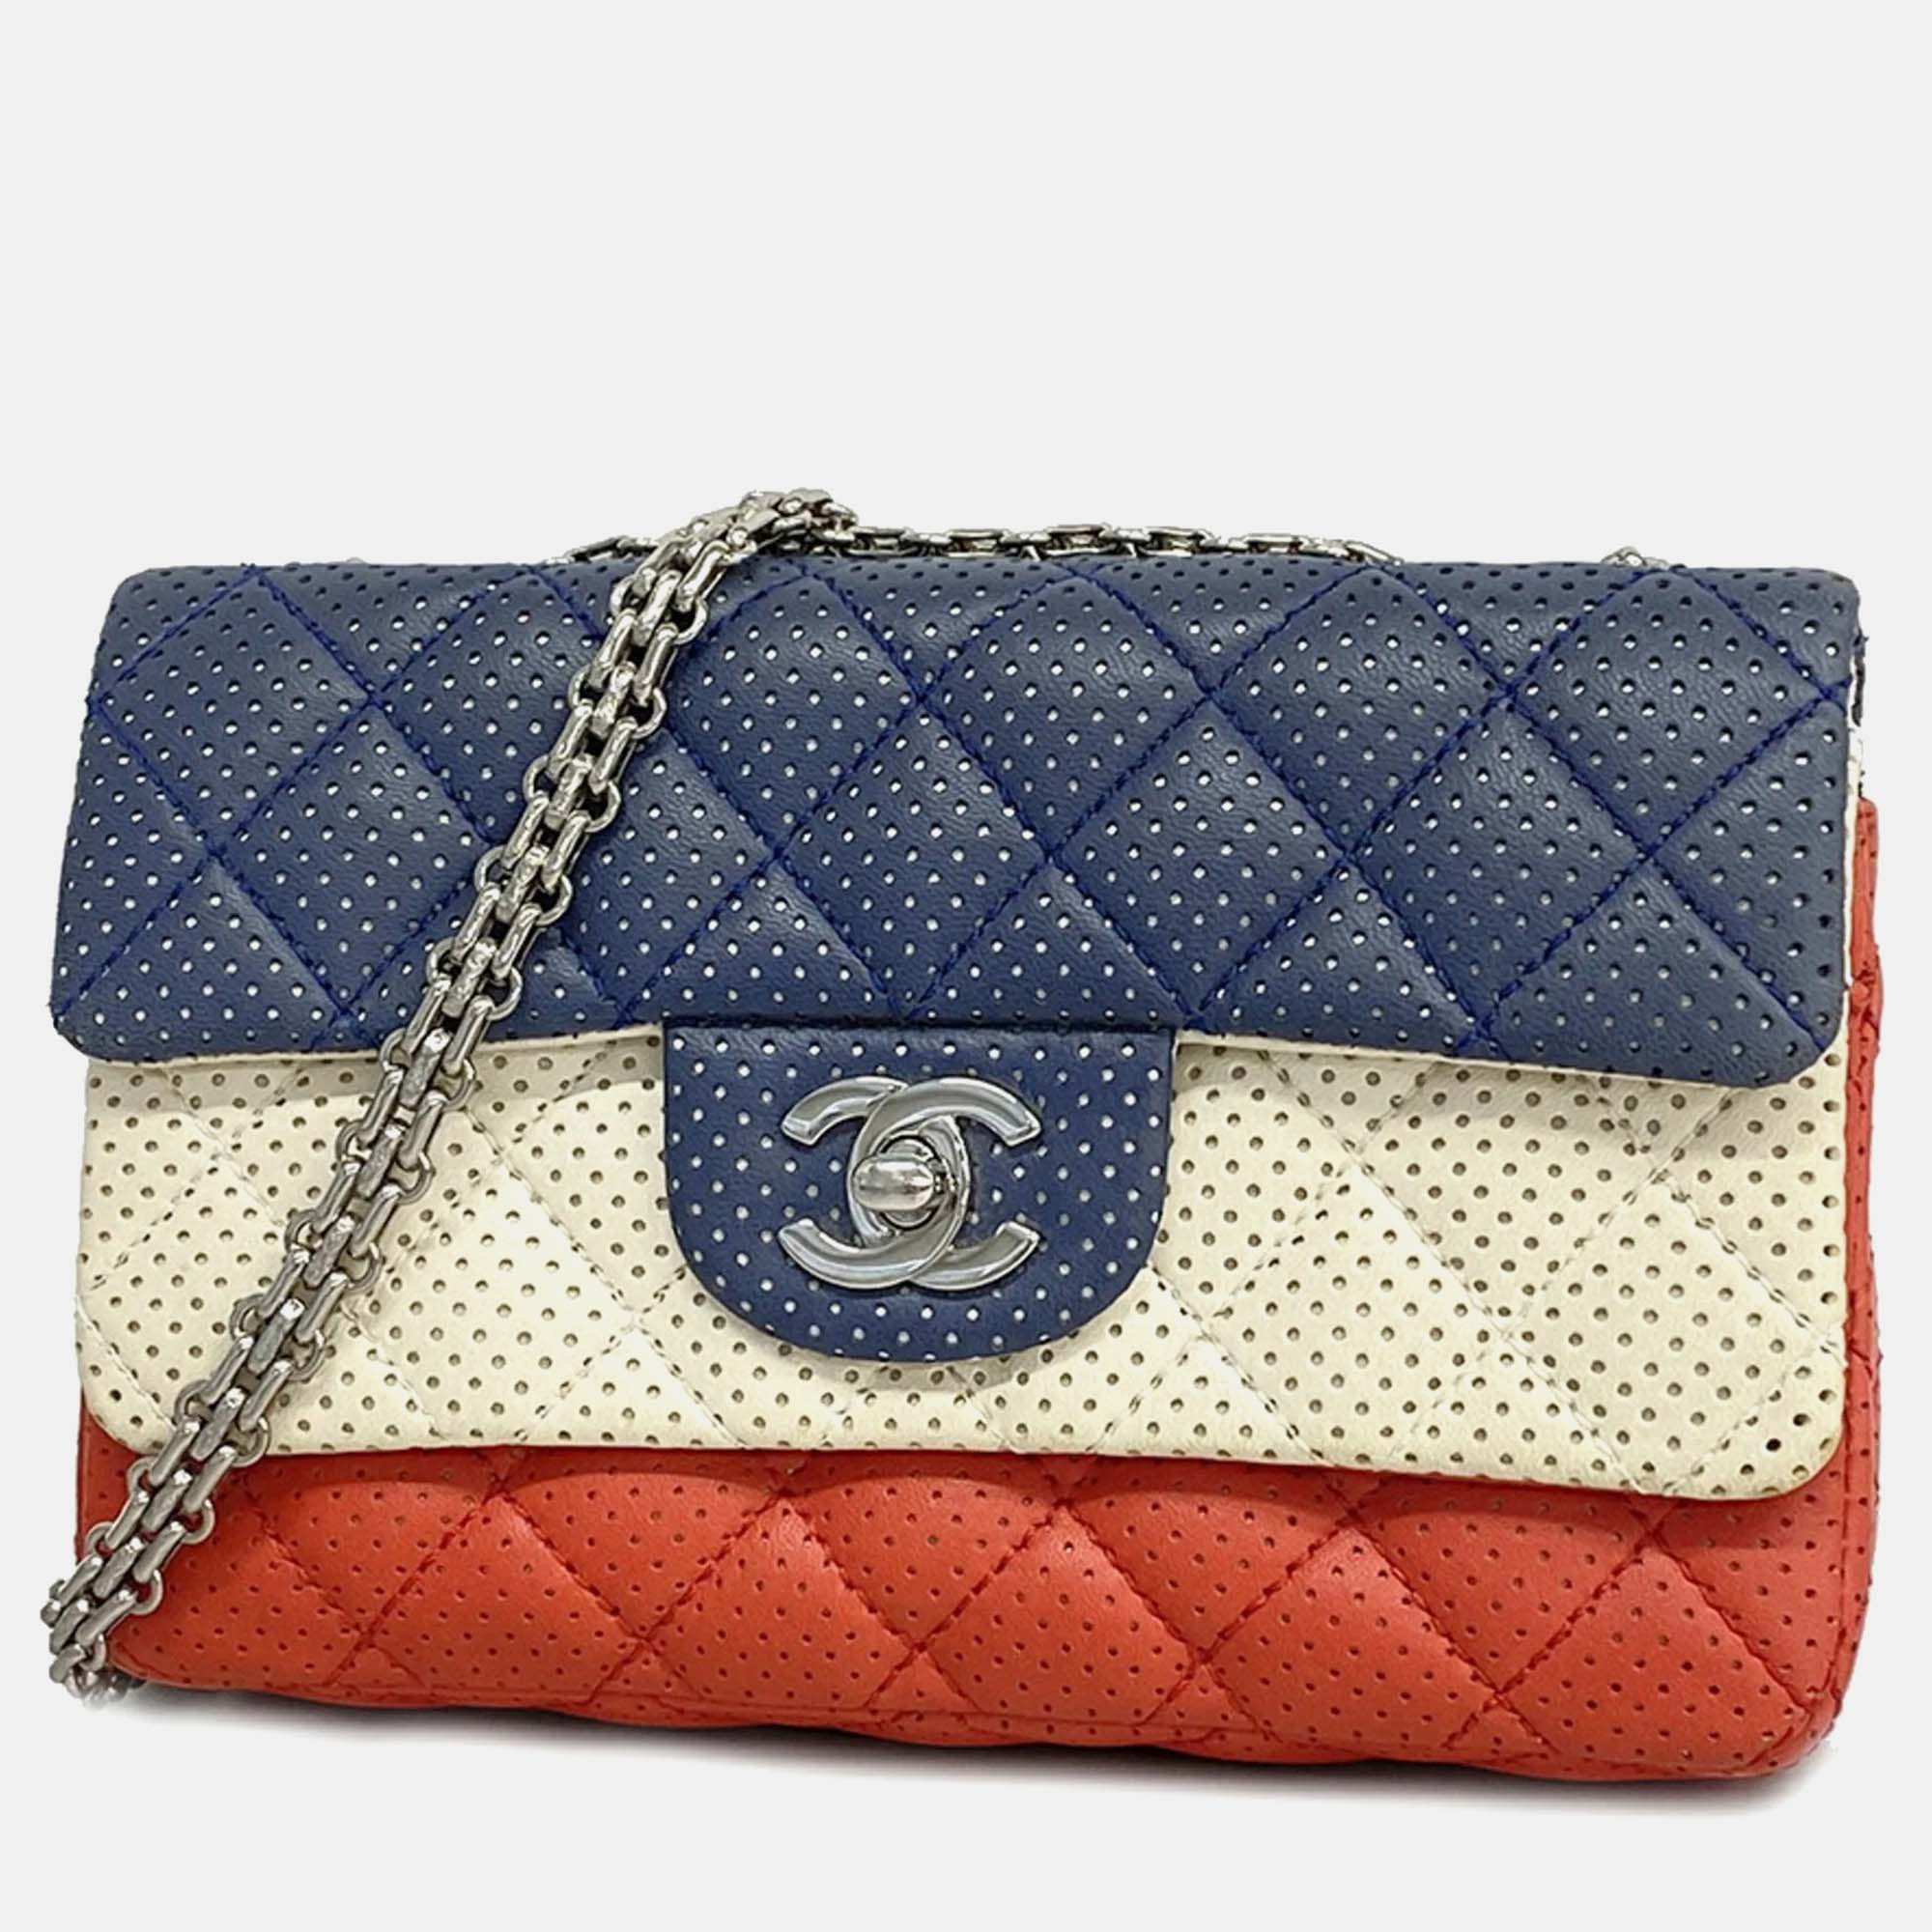 

Chanel Tricolor Perforated Mini Rectangle Flap Bag, Multicolor